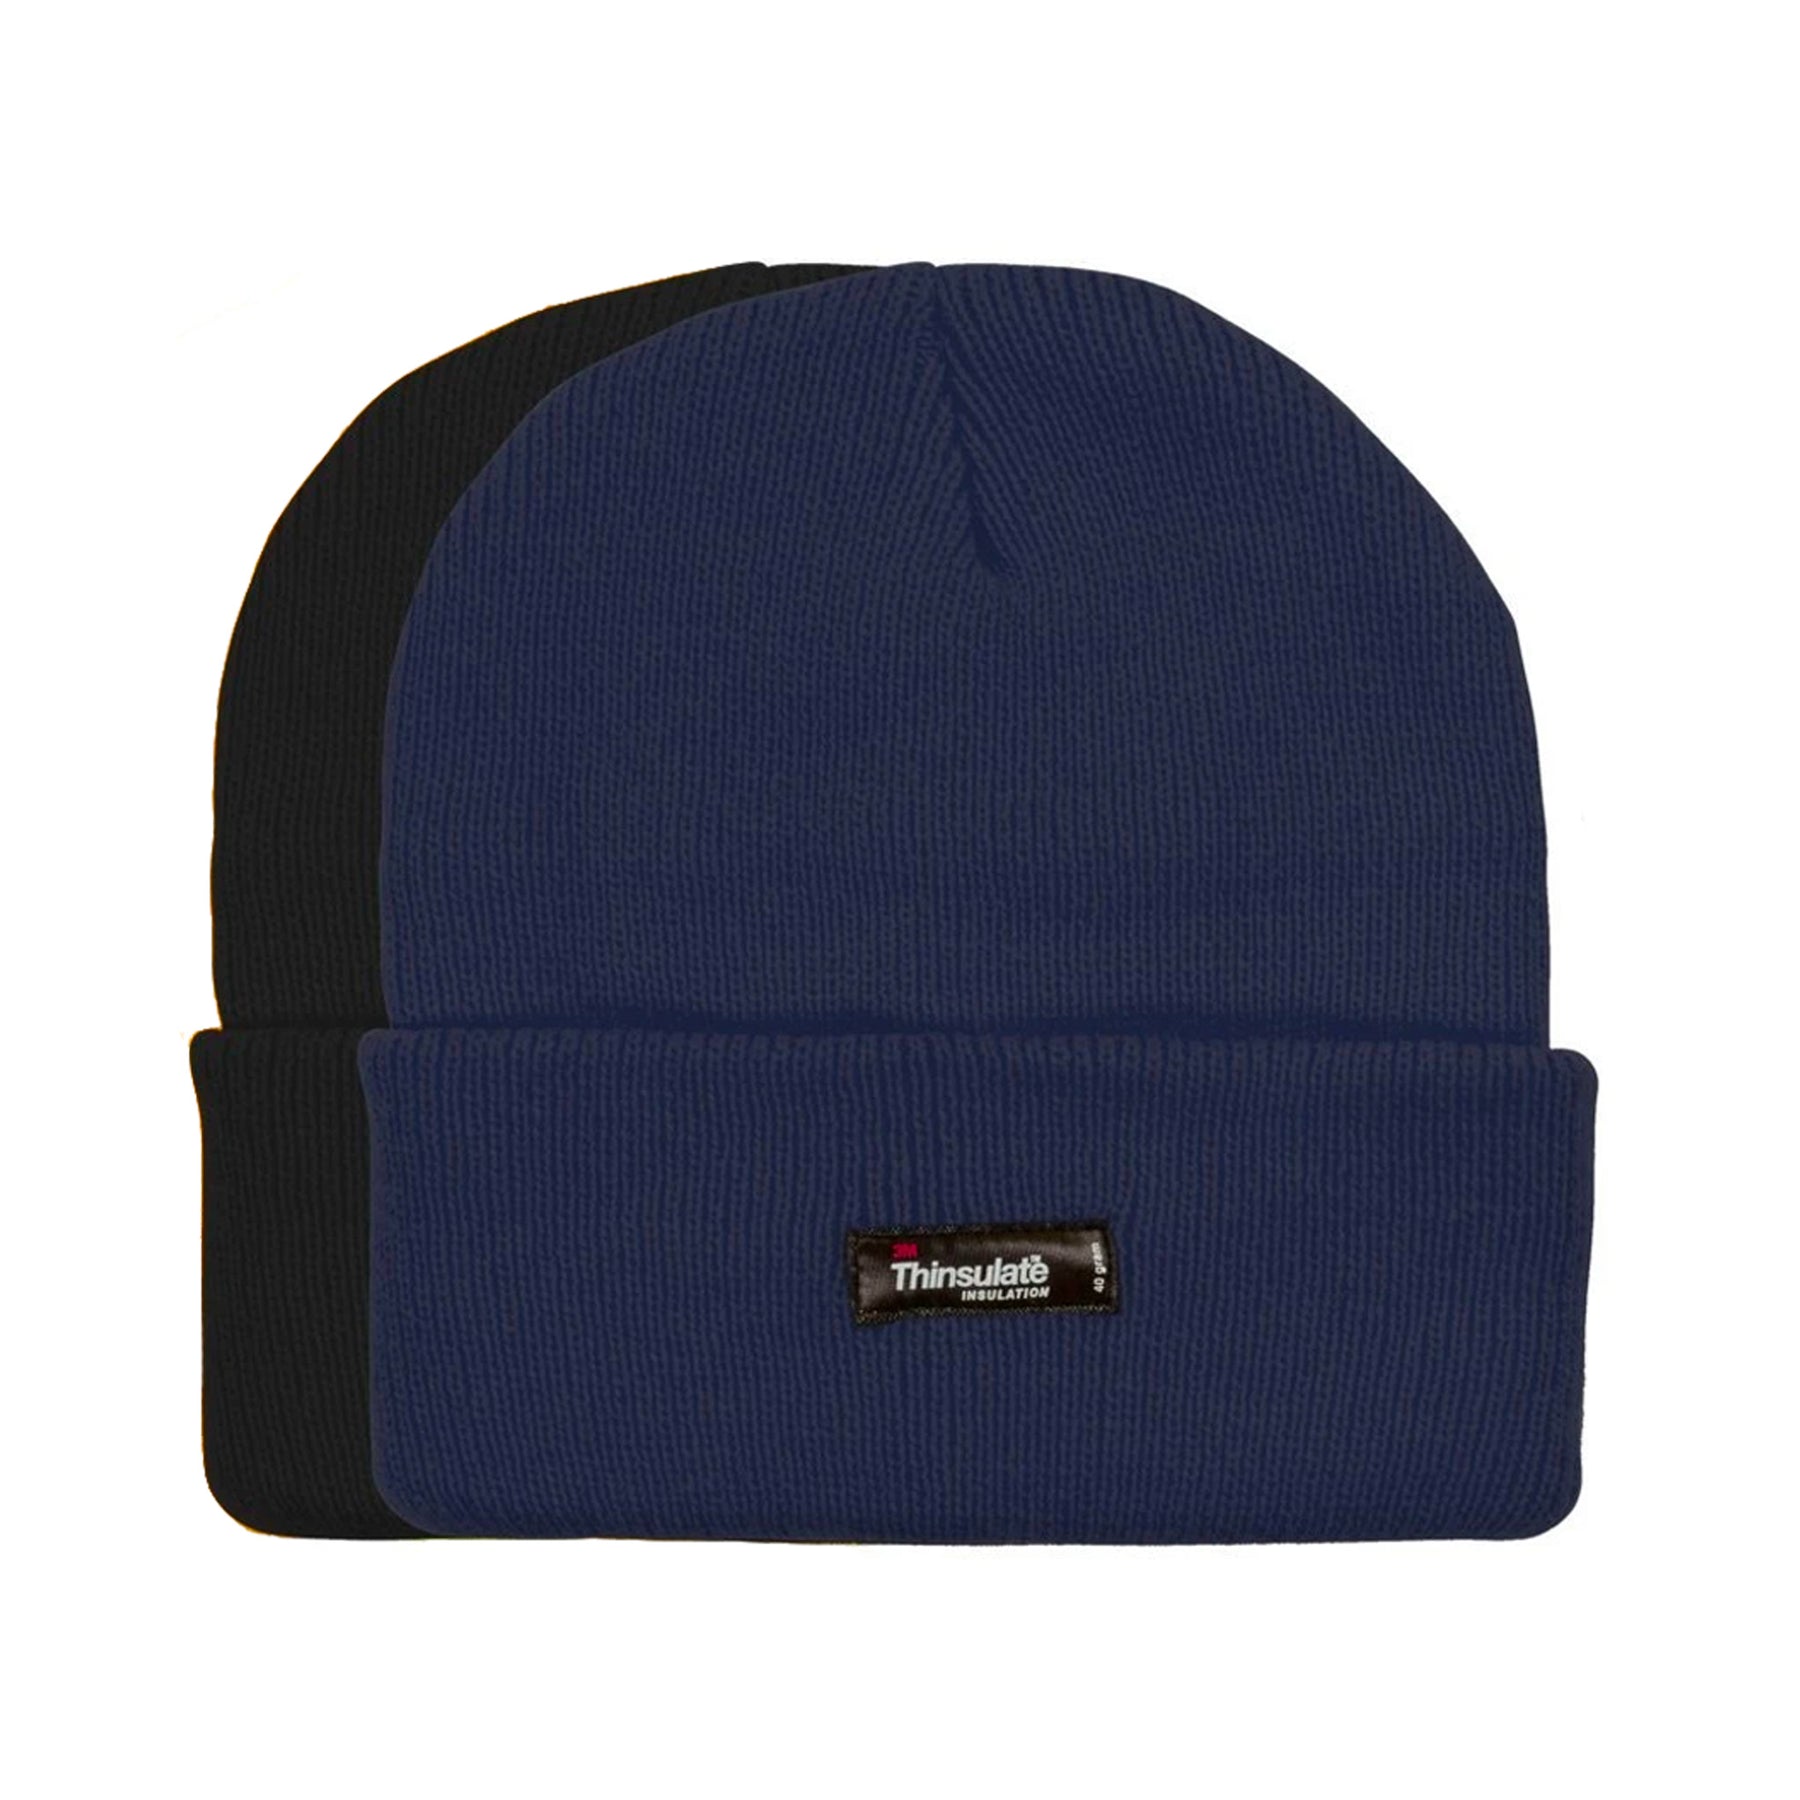 bad workwear beanie in navy and black